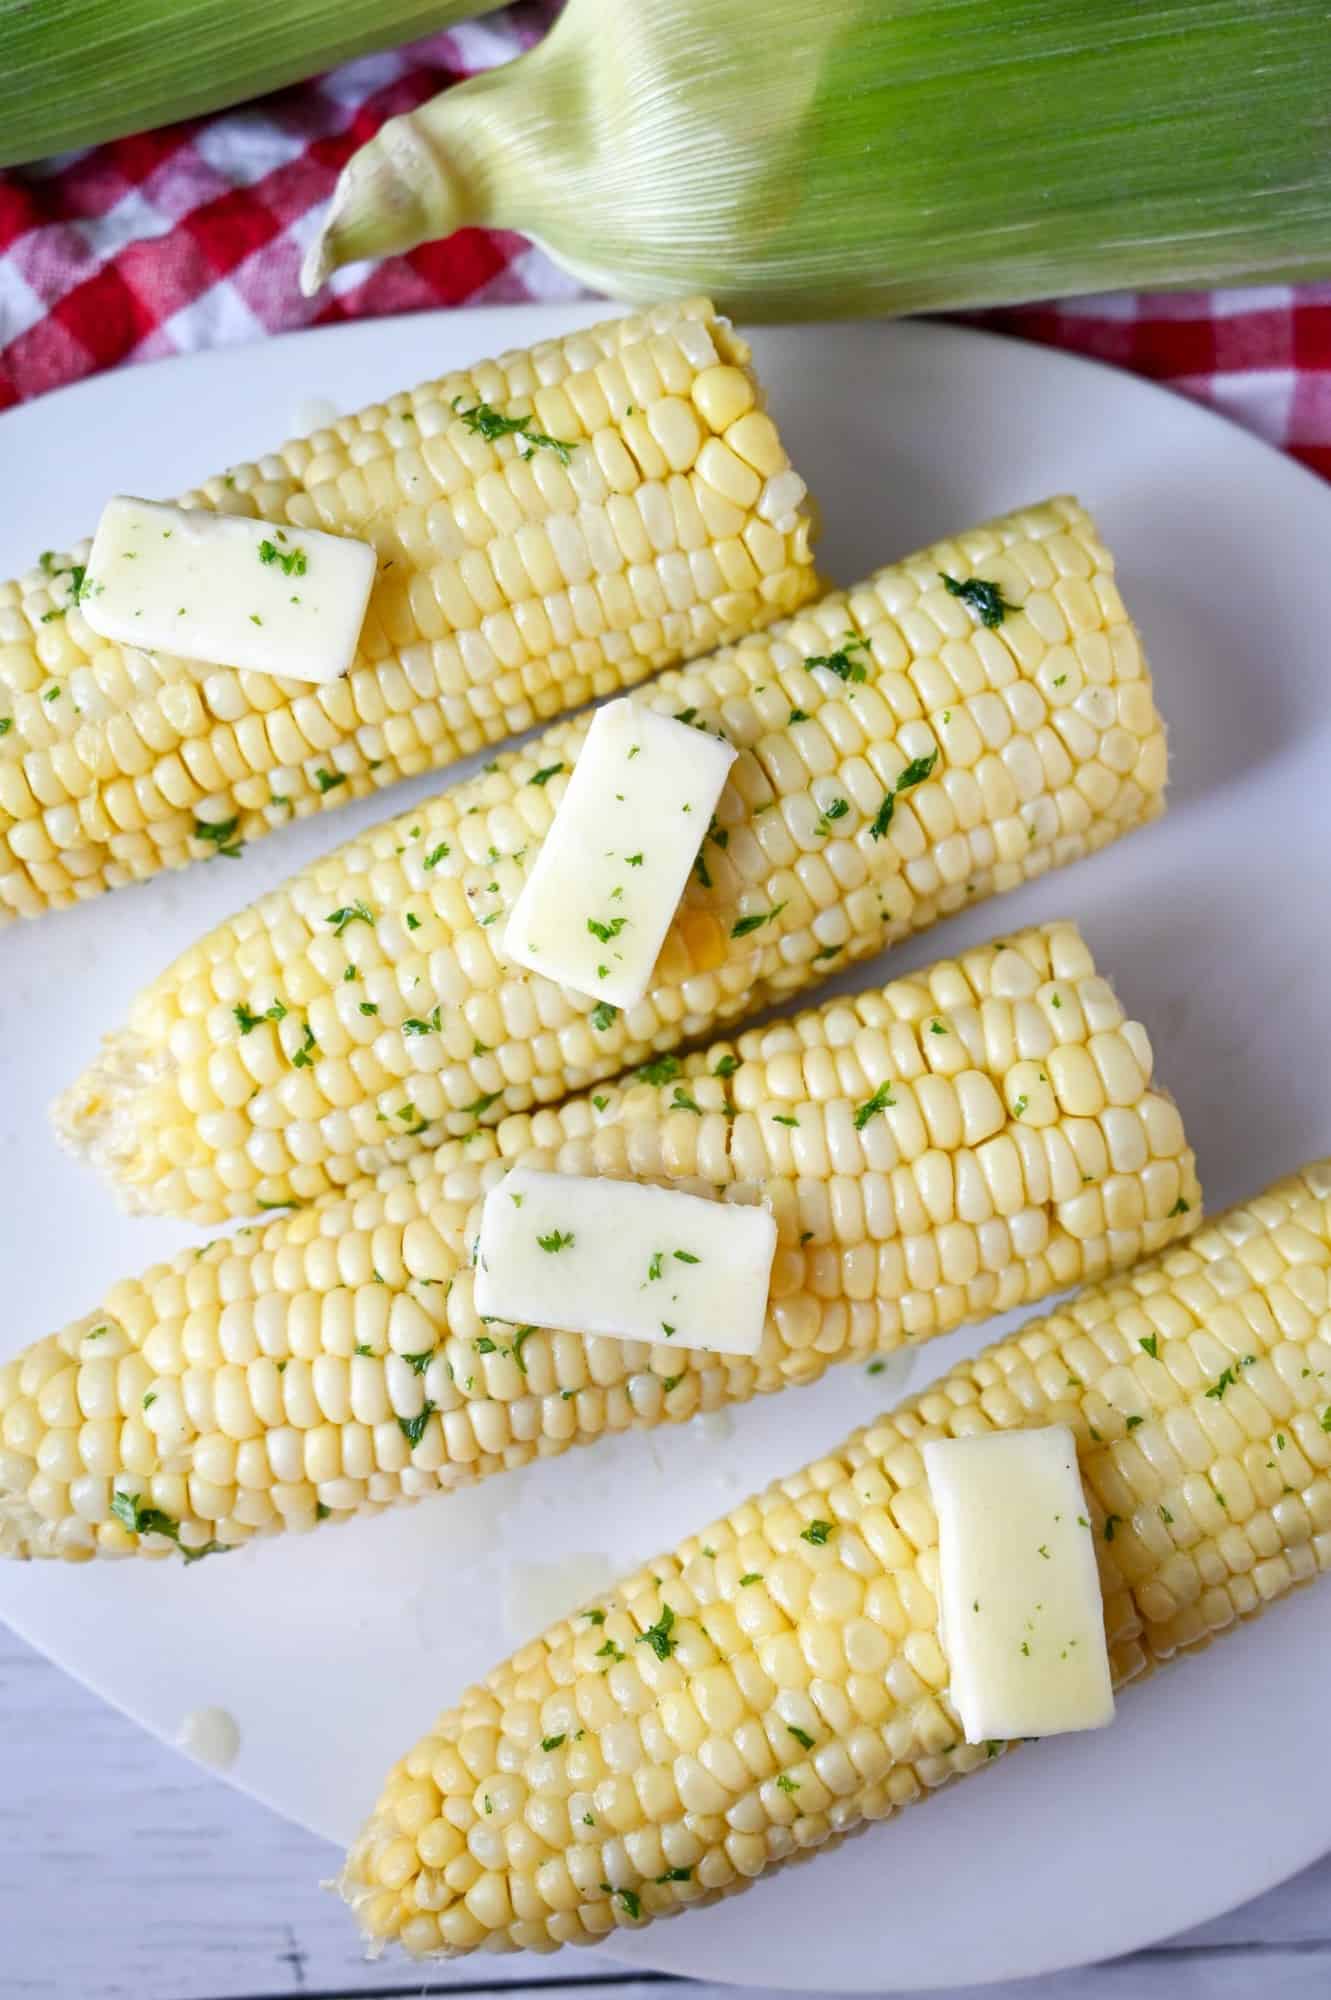 Four ears of microwaved corn on the cob and removed from the husk. Placed on a white plate with dabs of butter on each one.